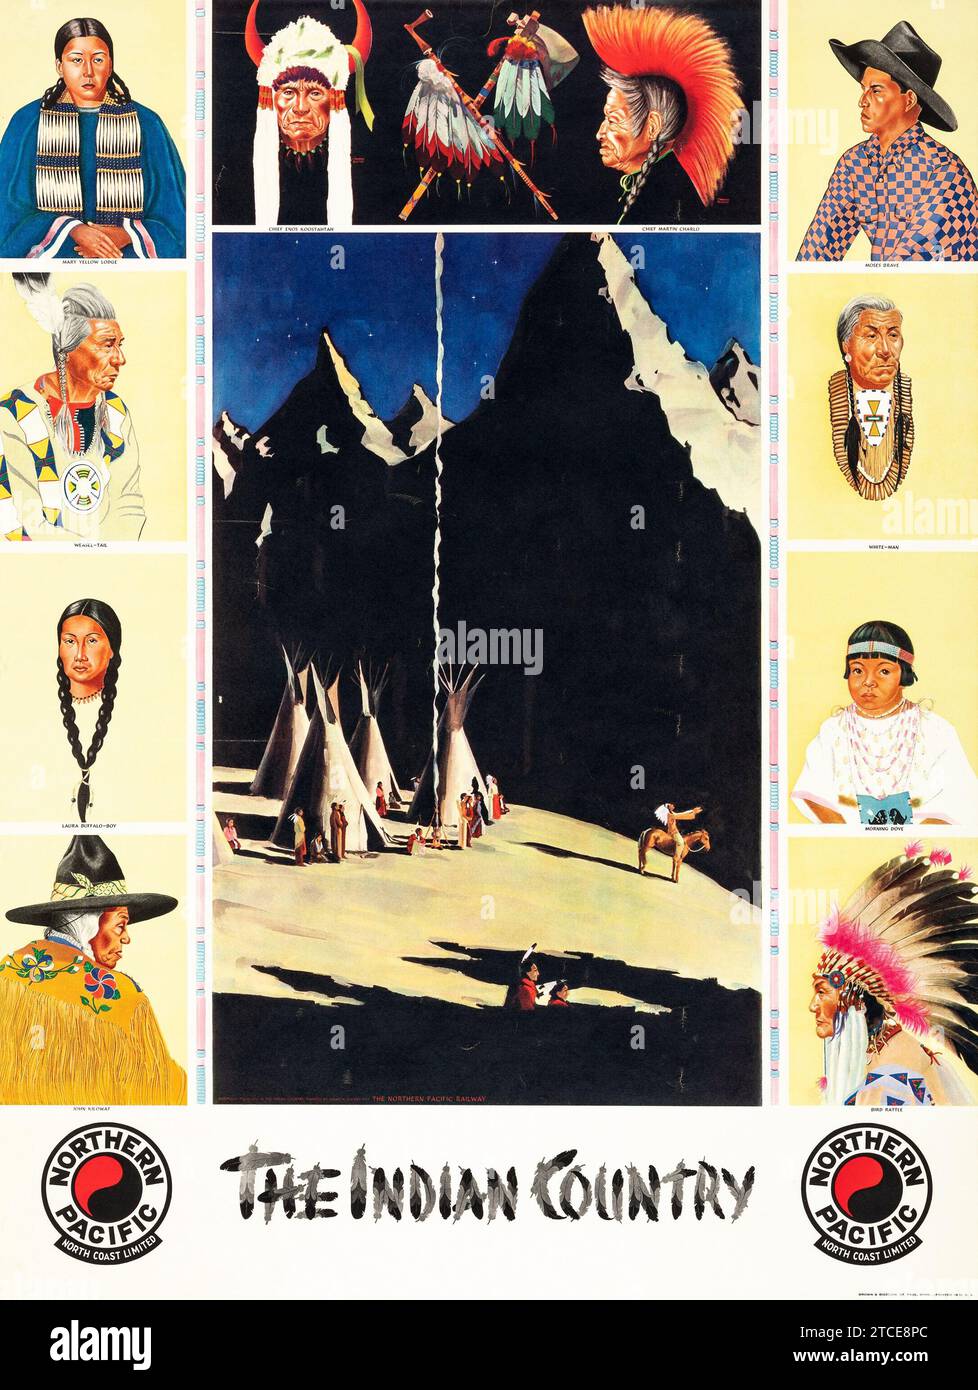 The Indian Country (Northern Pacific Railway, um 1935) American Travel Poster - Maaron Glemby Artwork Stockfoto